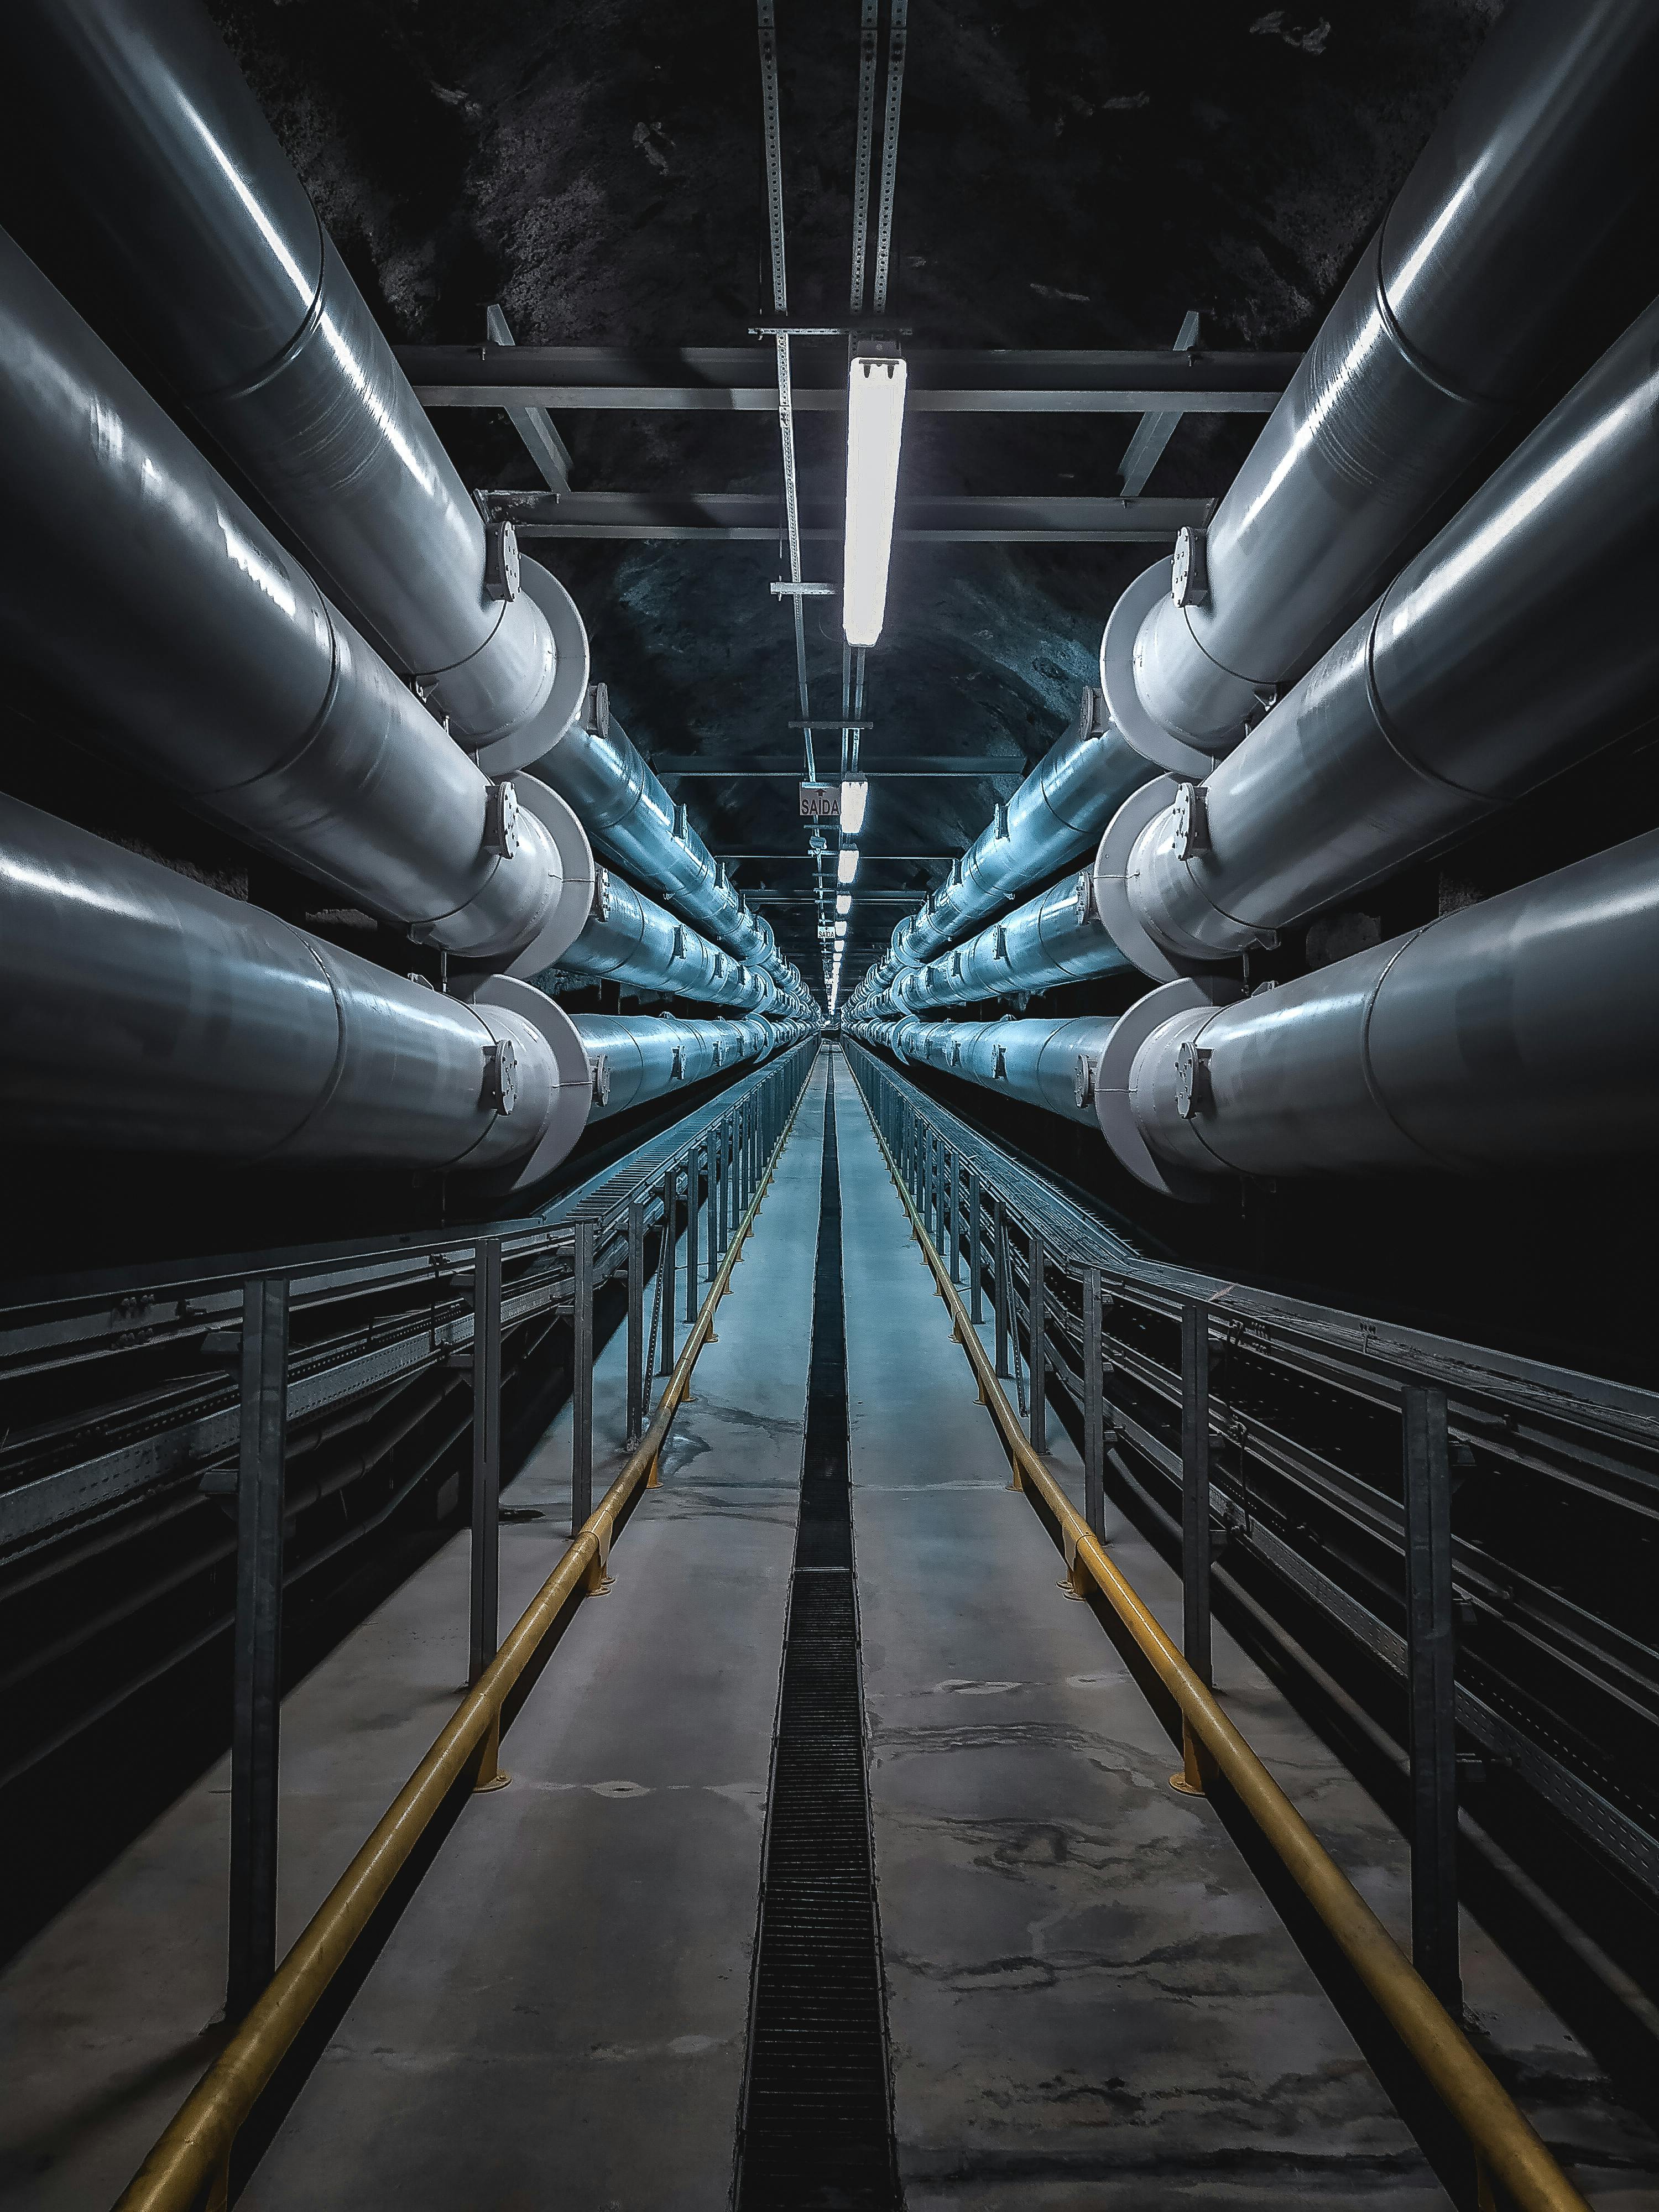 750 Pipe Pictures  Download Free Images on Unsplash